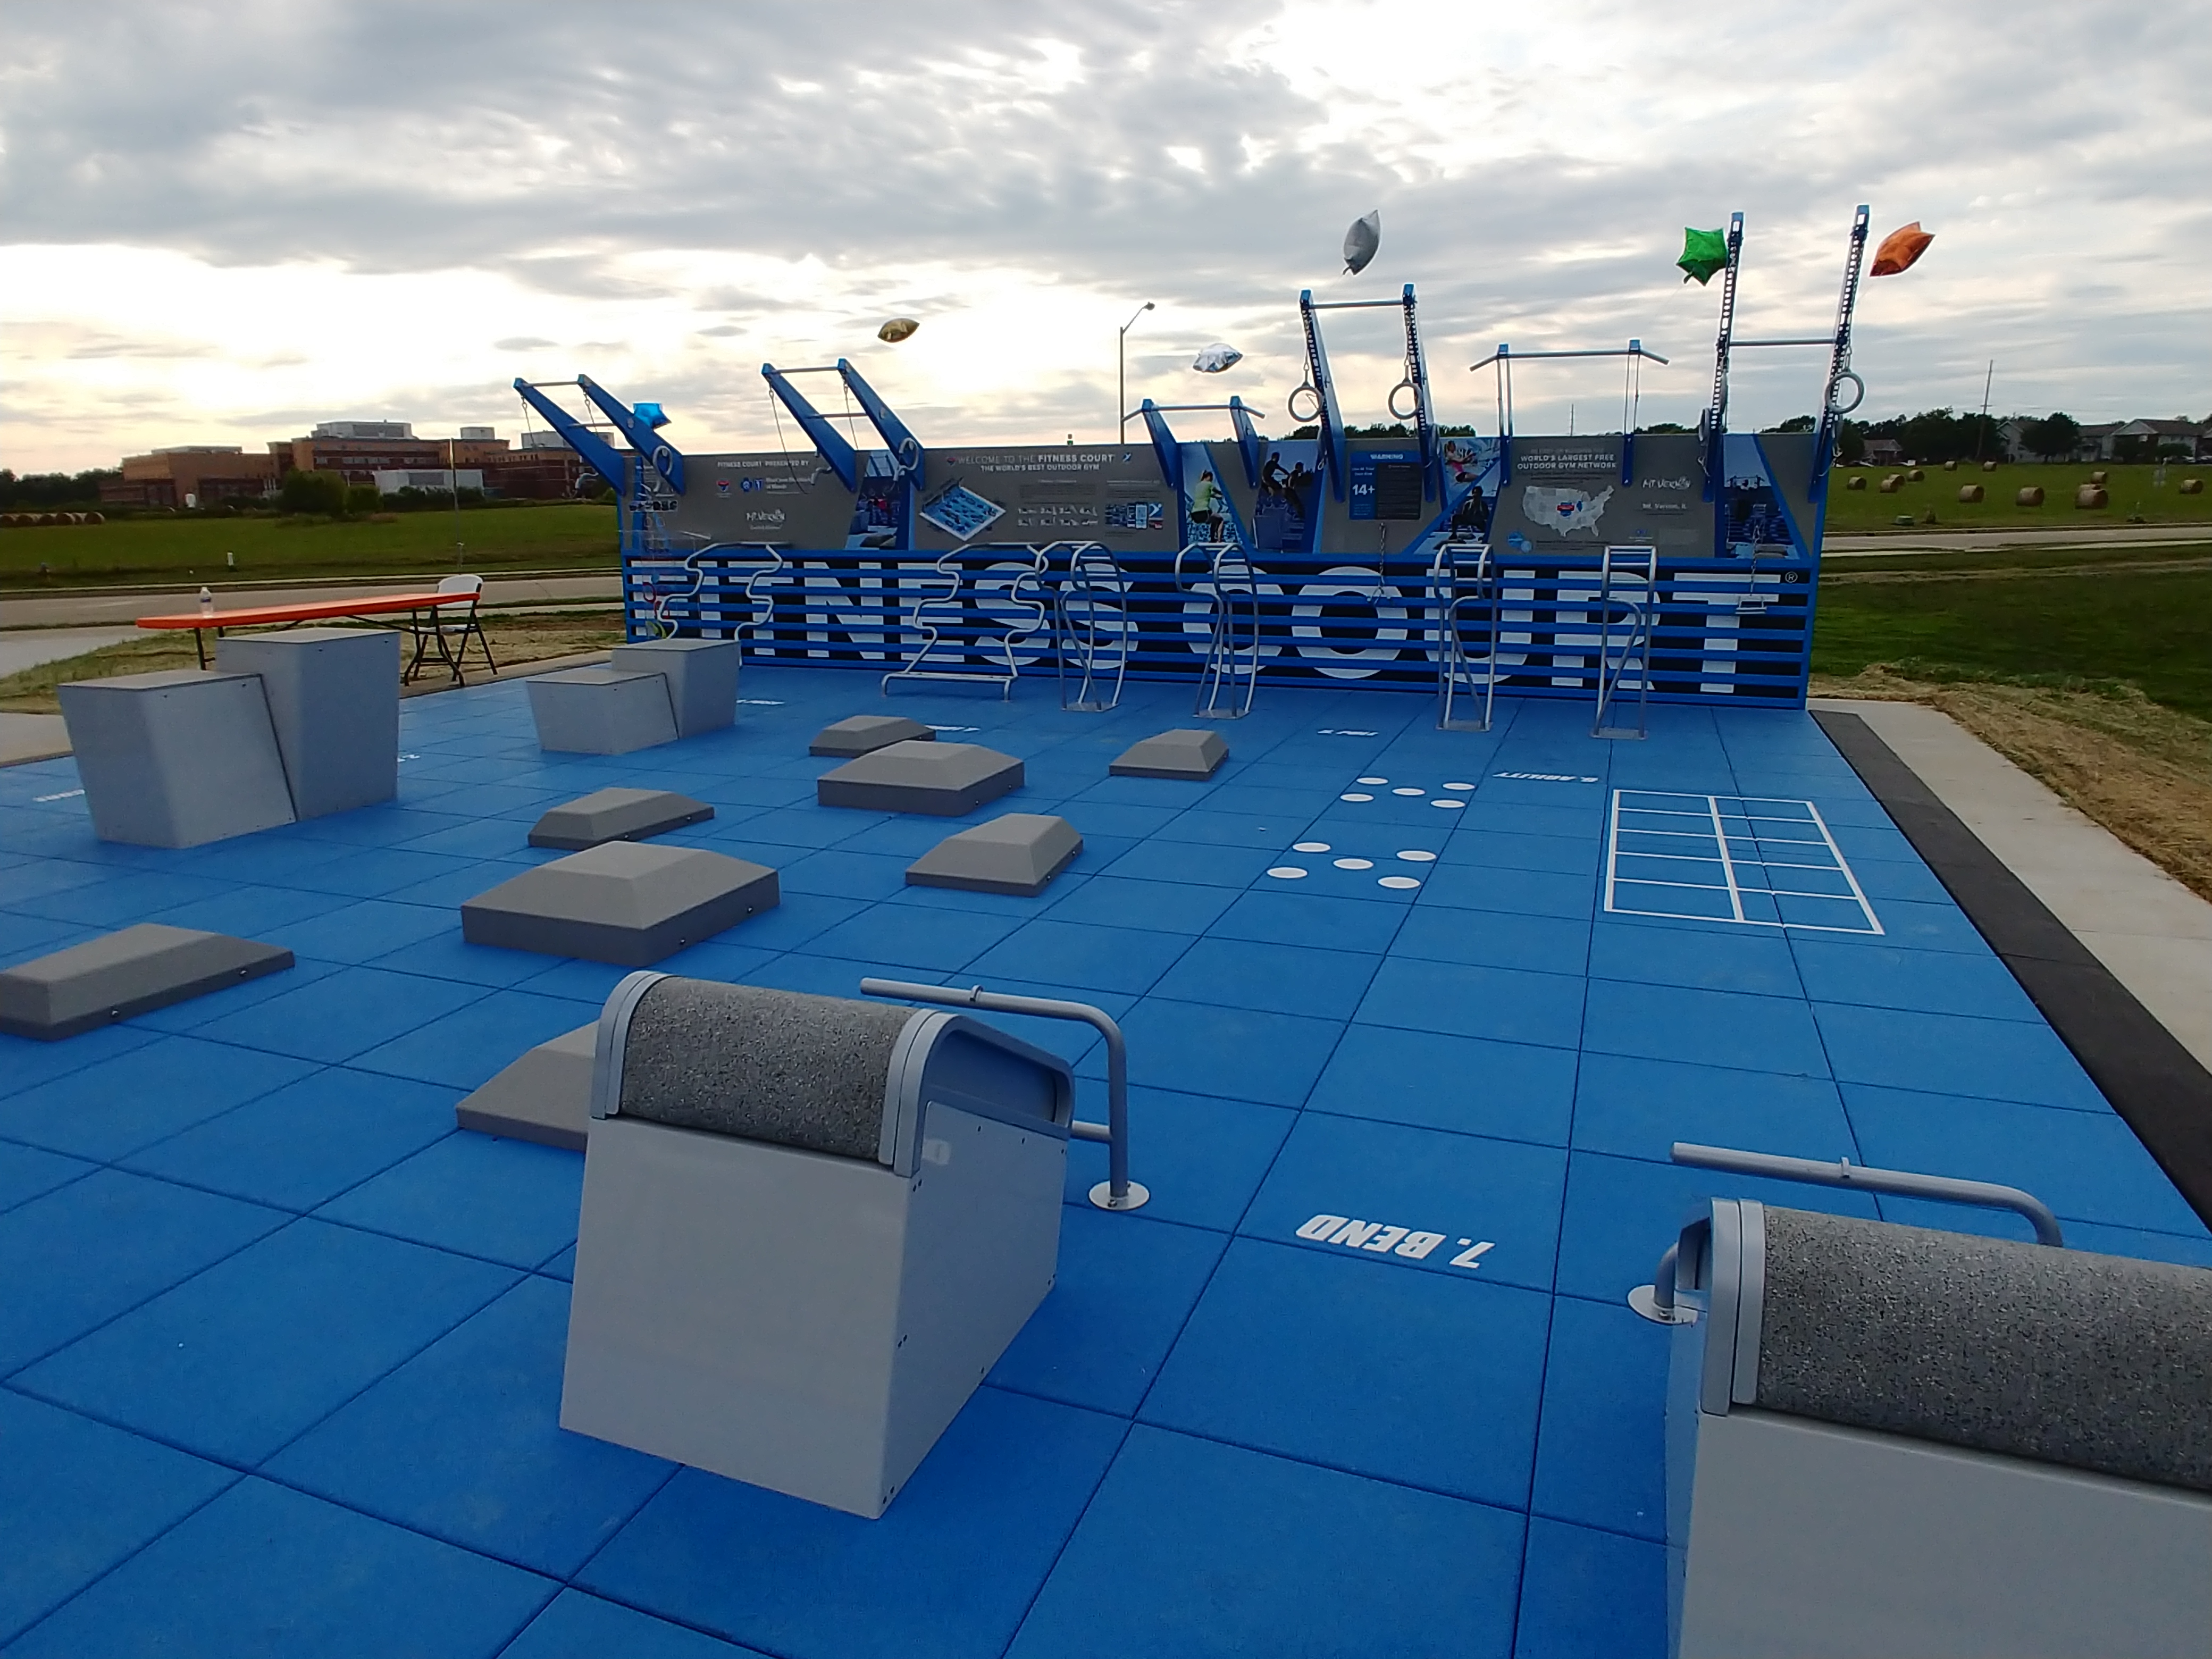 Outdoor court with exercise equipment